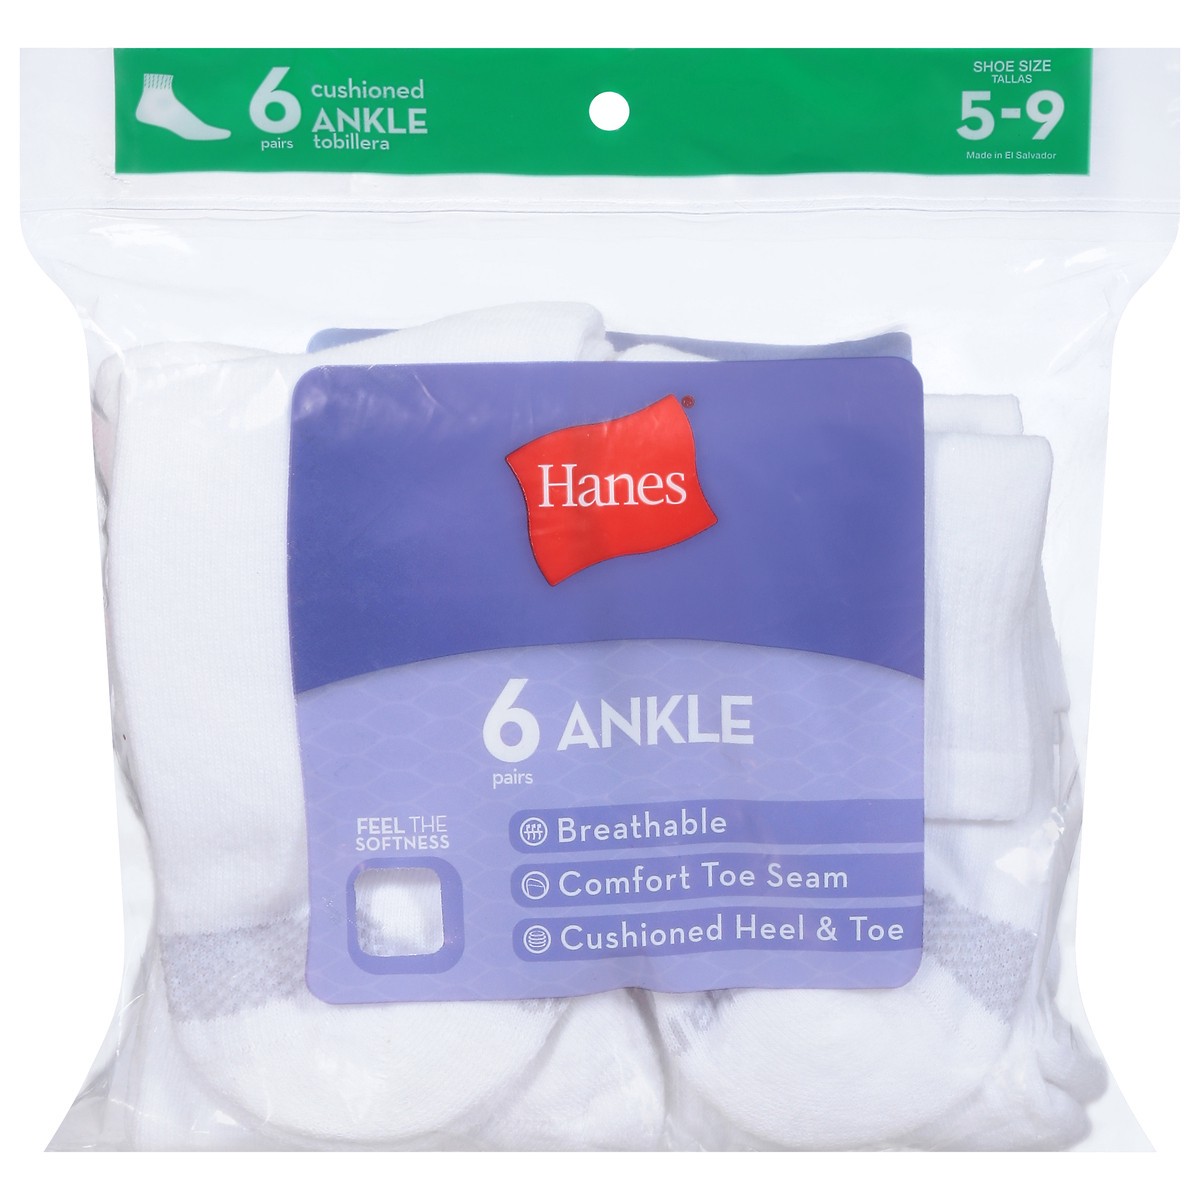 slide 1 of 9, Hanes Shoe Size 5-9 Cushioned Ankle Socks 6 Pairs, 1 ct